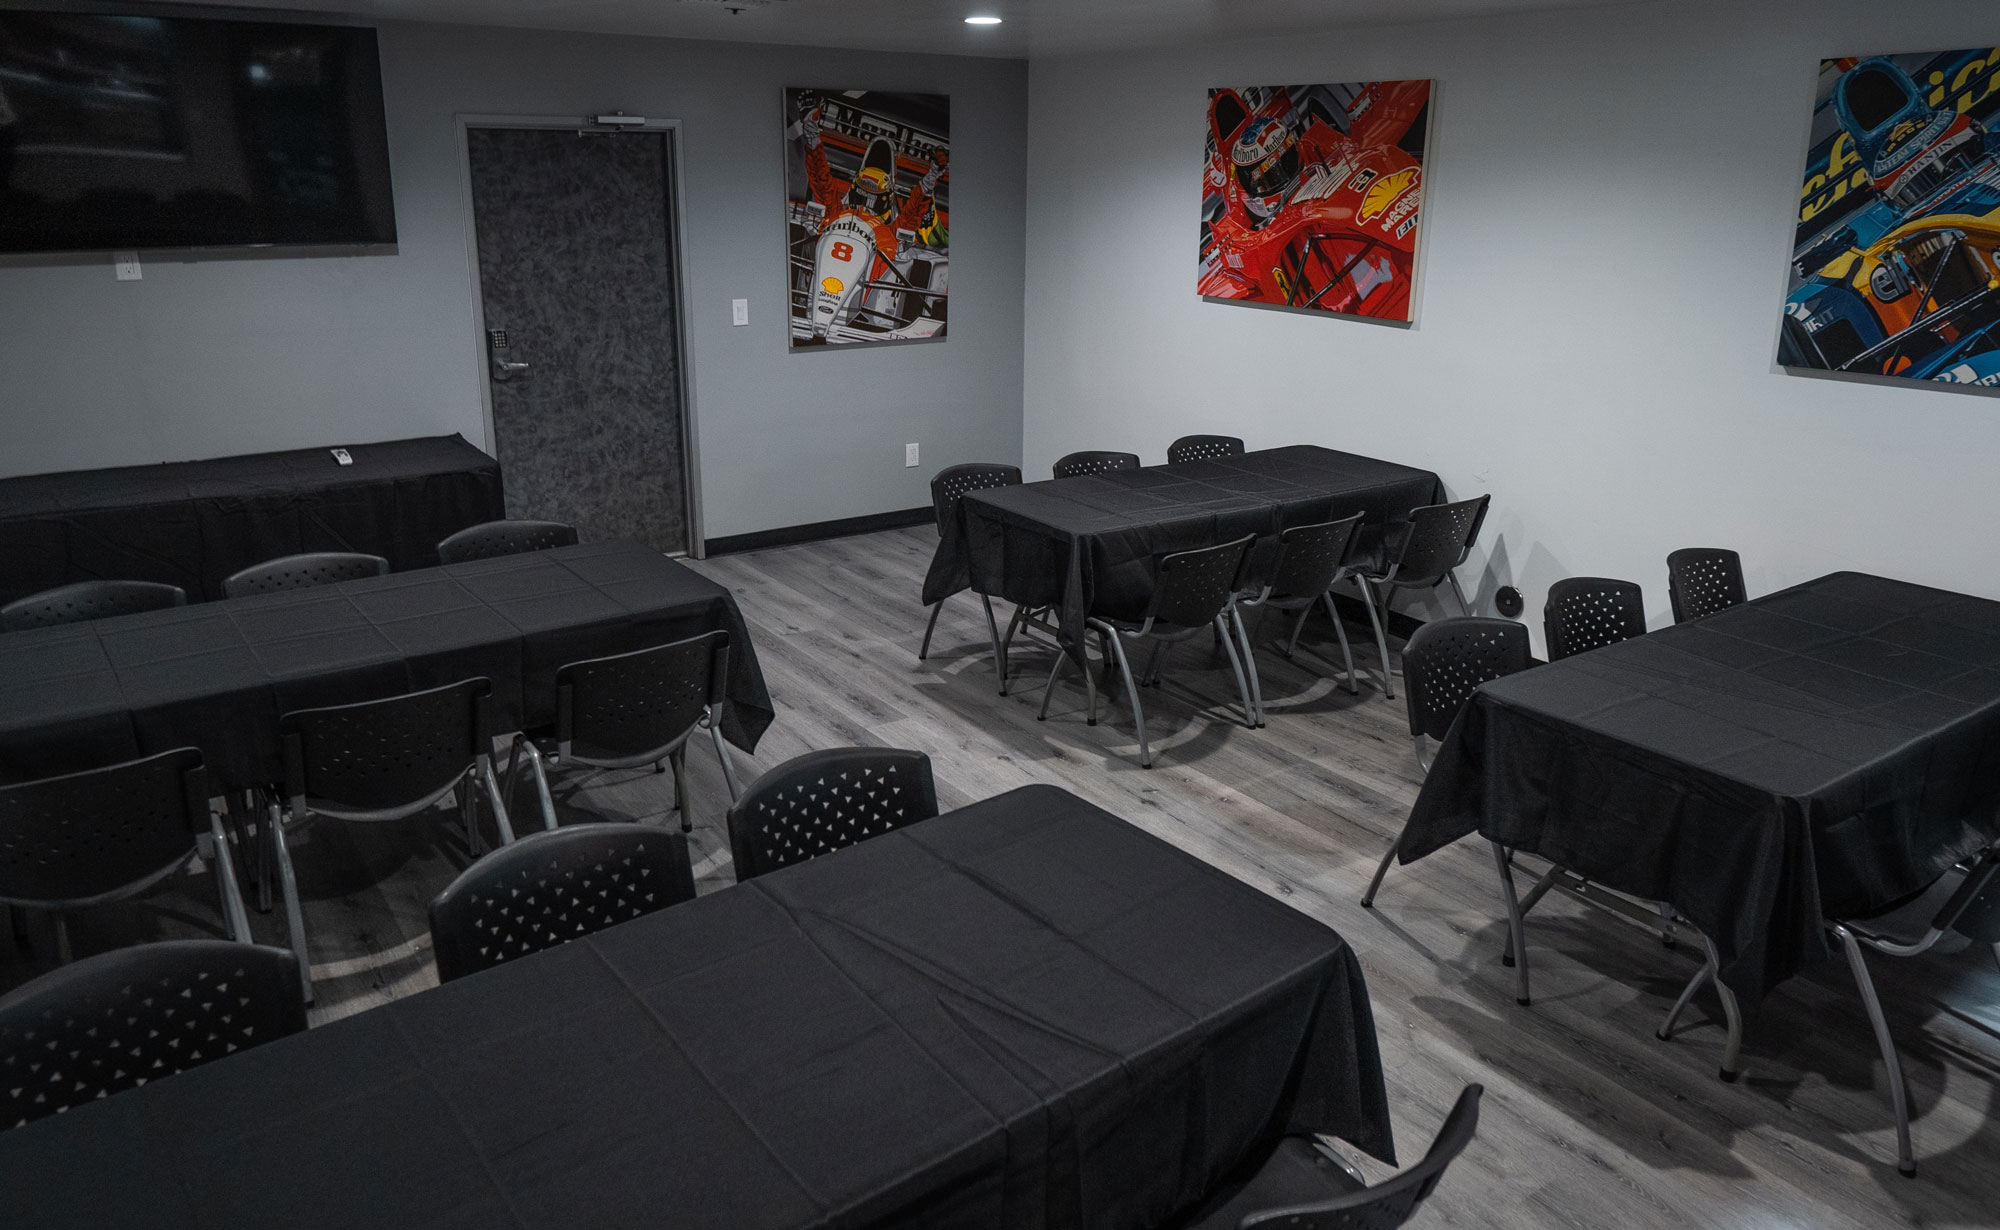 One of the event rooms inside K1 Speed Burbank for parties and events